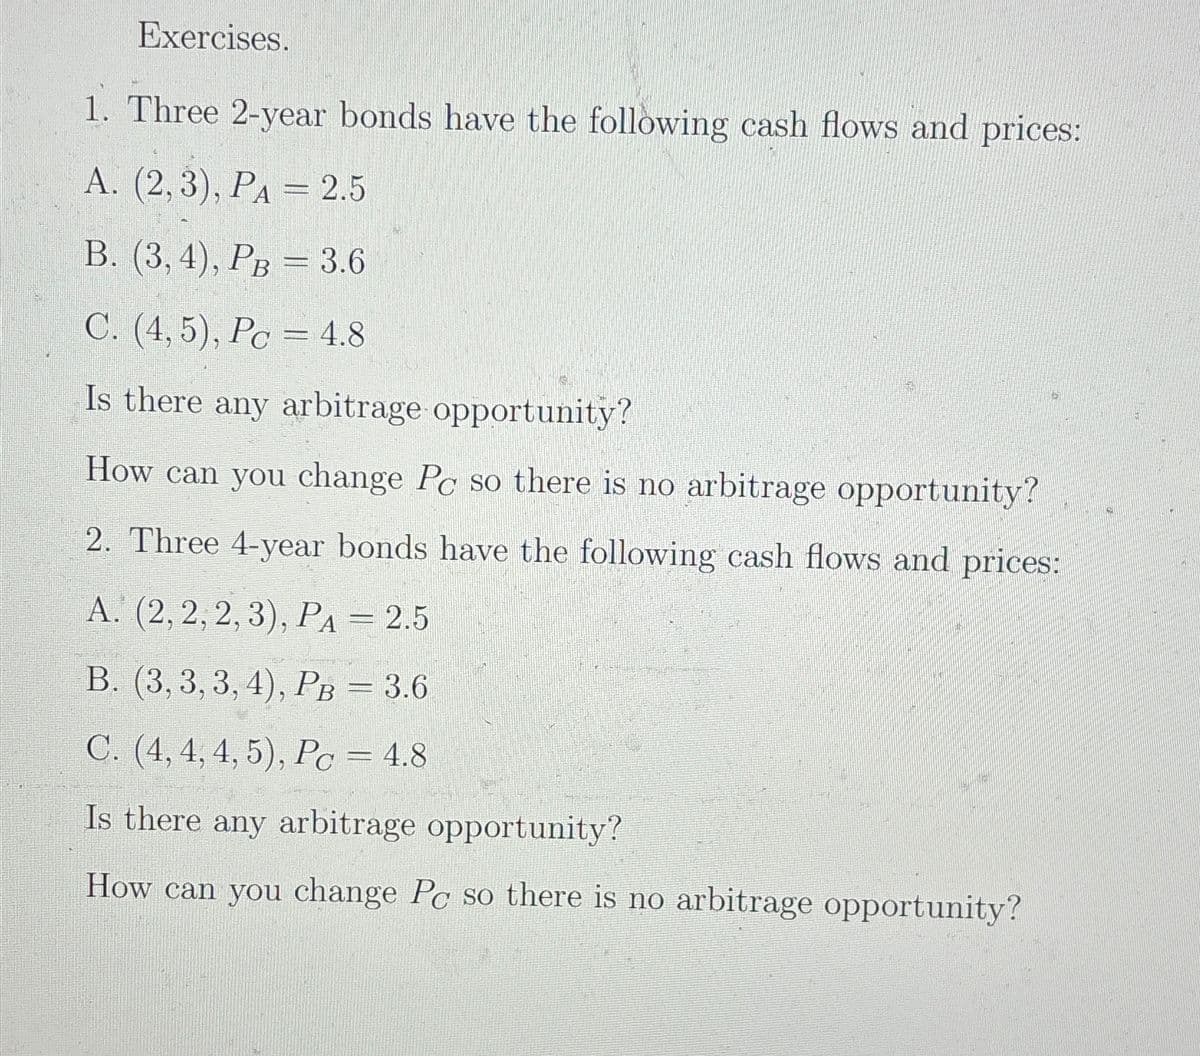 Exercises.
1. Three 2-year bonds have the following cash flows and prices:
A. (2,3), PA = 2.5
B. (3, 4), PB = 3.6
C. (4,5), Pc 4.8
Is there any arbitrage opportunity?
How can you change Pc so there is no arbitrage opportunity?
2. Three 4-year bonds have the following cash flows and prices:
A. (2, 2, 2, 3), PA = 2.5
B. (3, 3, 3, 4), PB = 3.6
C. (4, 4, 4, 5), Pc = 4.8
Is there any arbitrage opportunity?
How can you change Pc so there is no arbitrage opportunity?